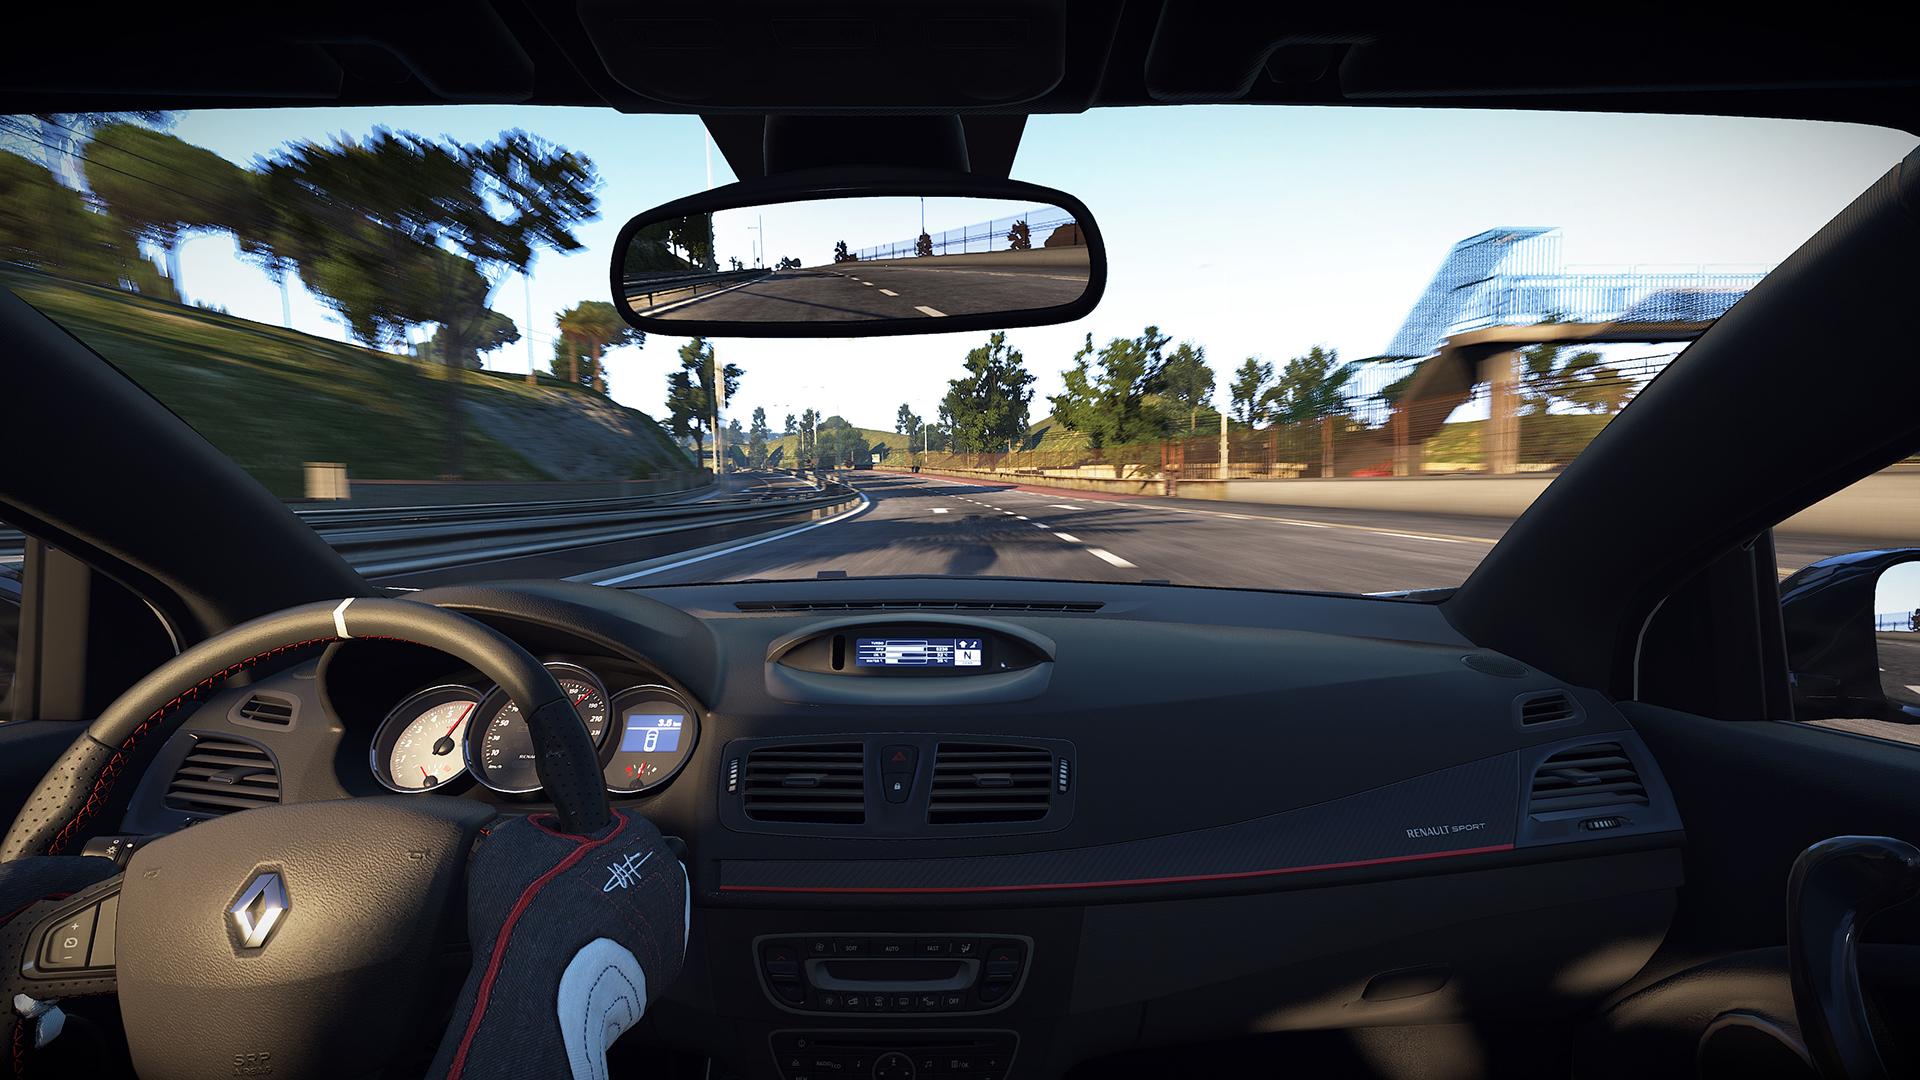 Project Cars Review (PC)